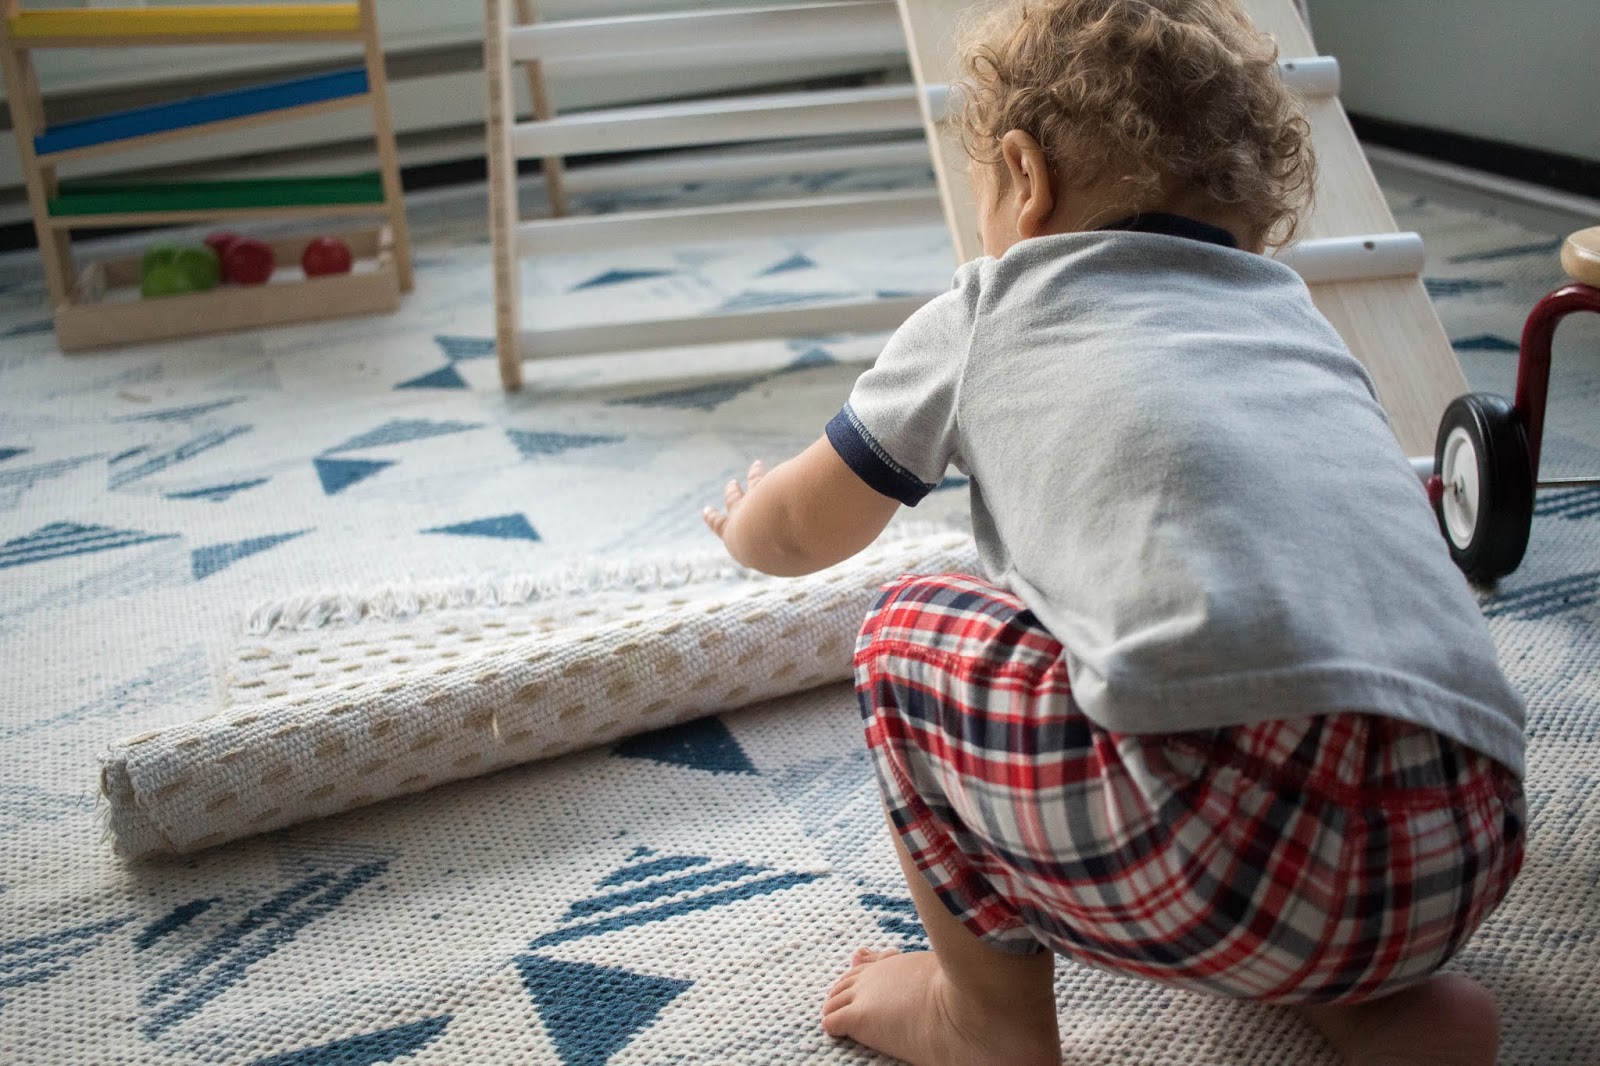 Less Mess Playtime with a Montessori Work Mat ⋆ Exploring Domesticity